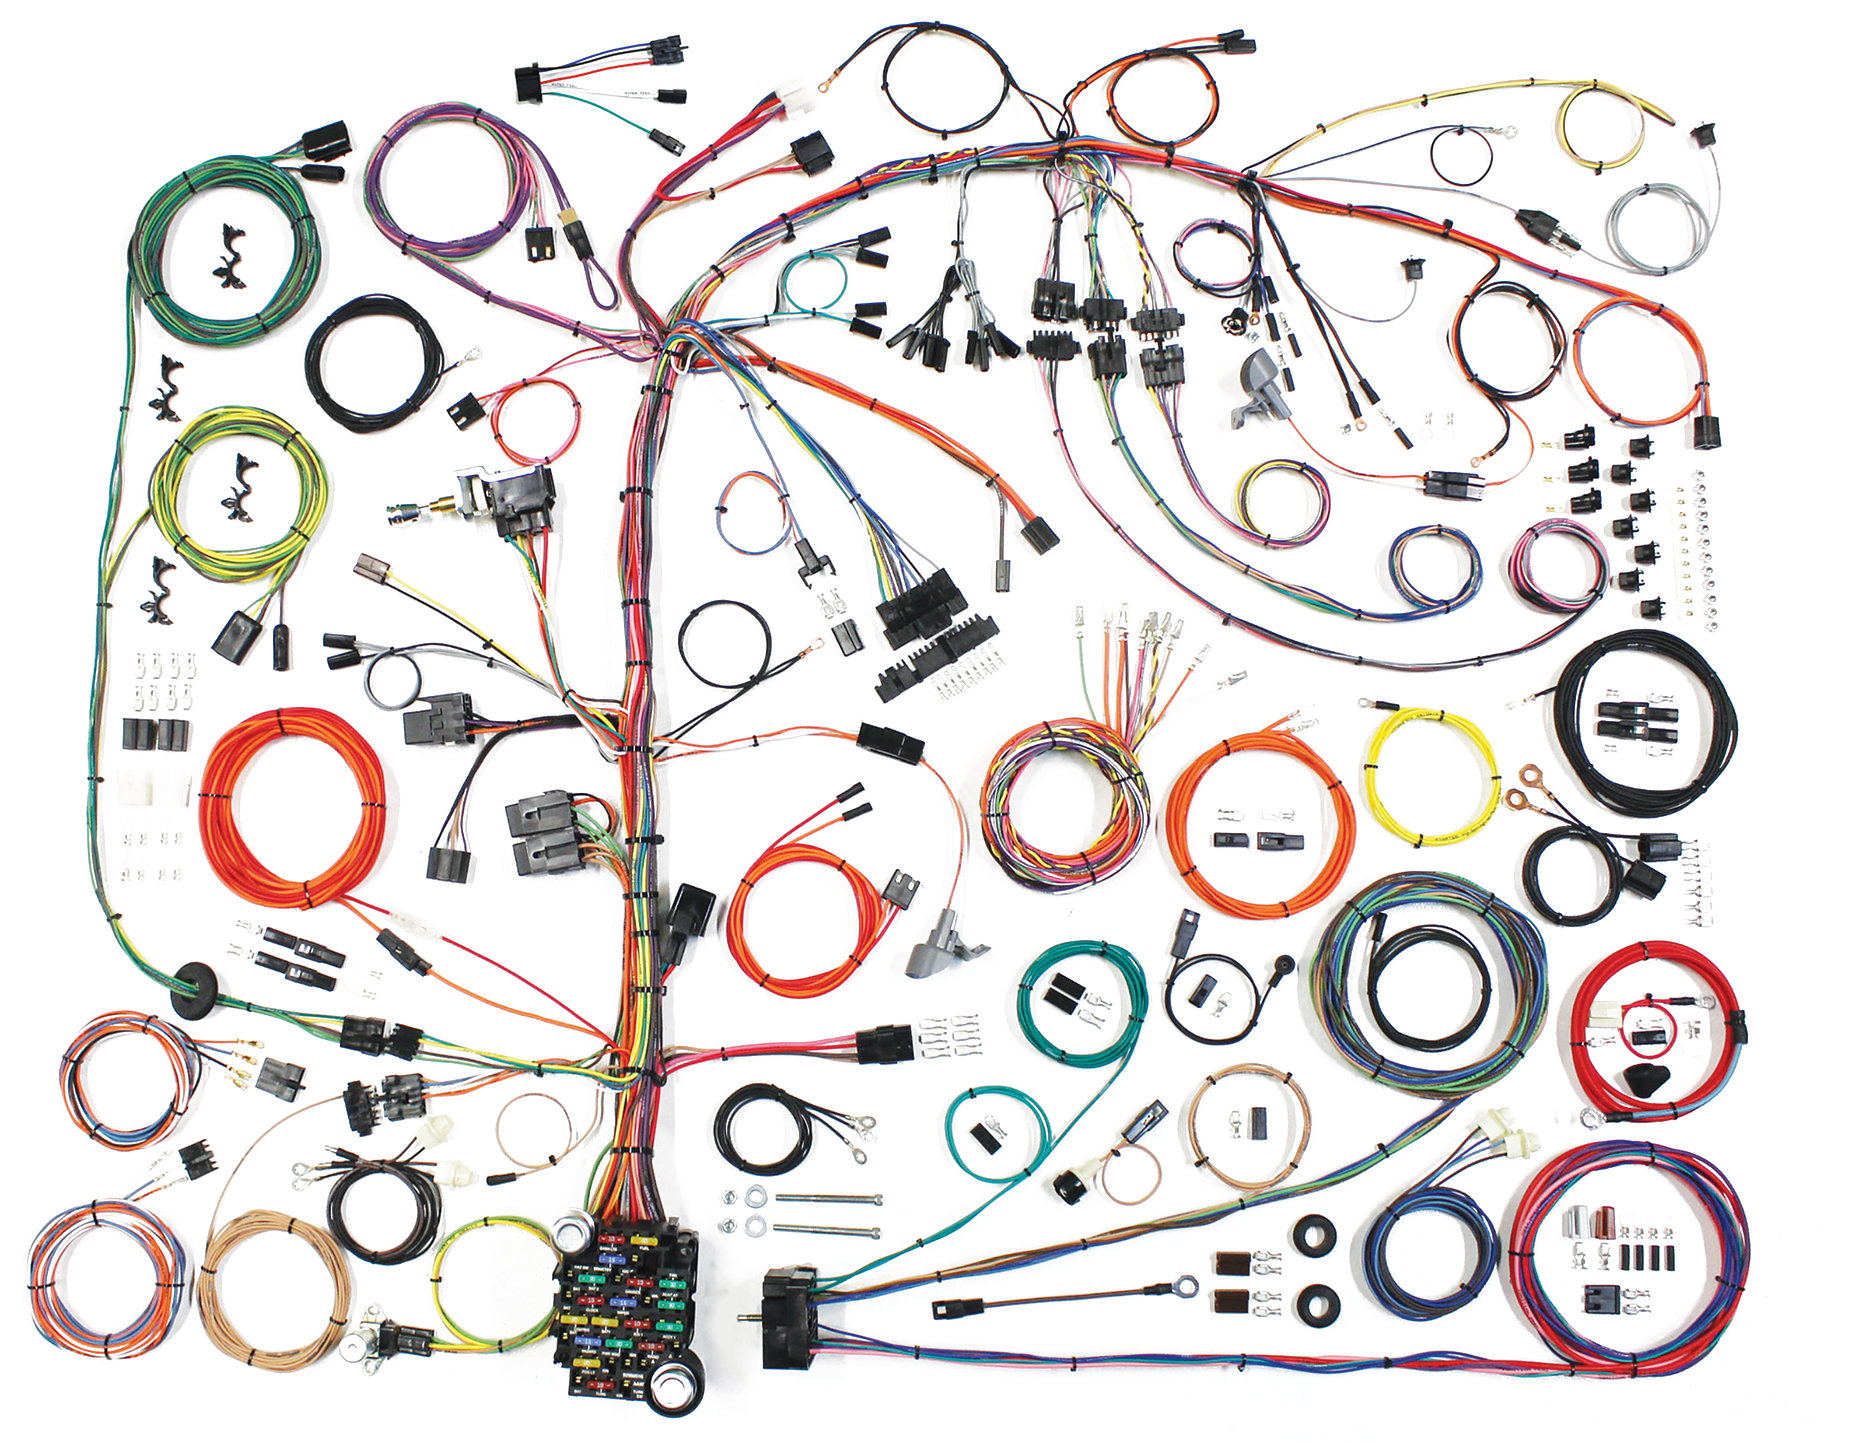 1979 Jeep Cj7 Wiring Harness Images - Wiring Diagram Sample